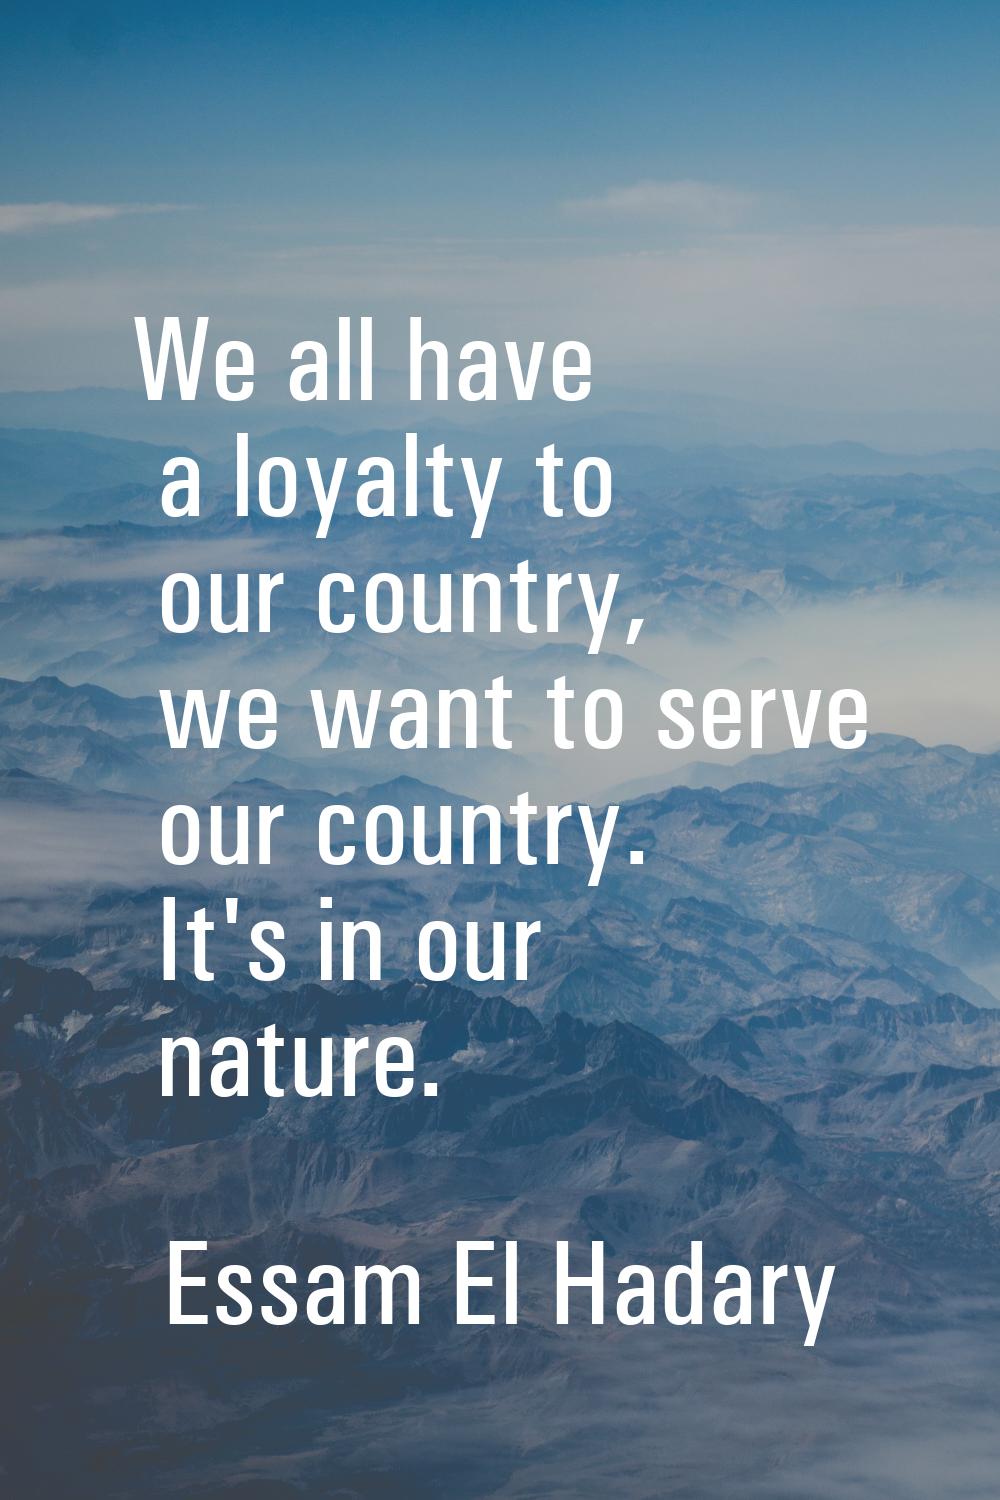 We all have a loyalty to our country, we want to serve our country. It's in our nature.